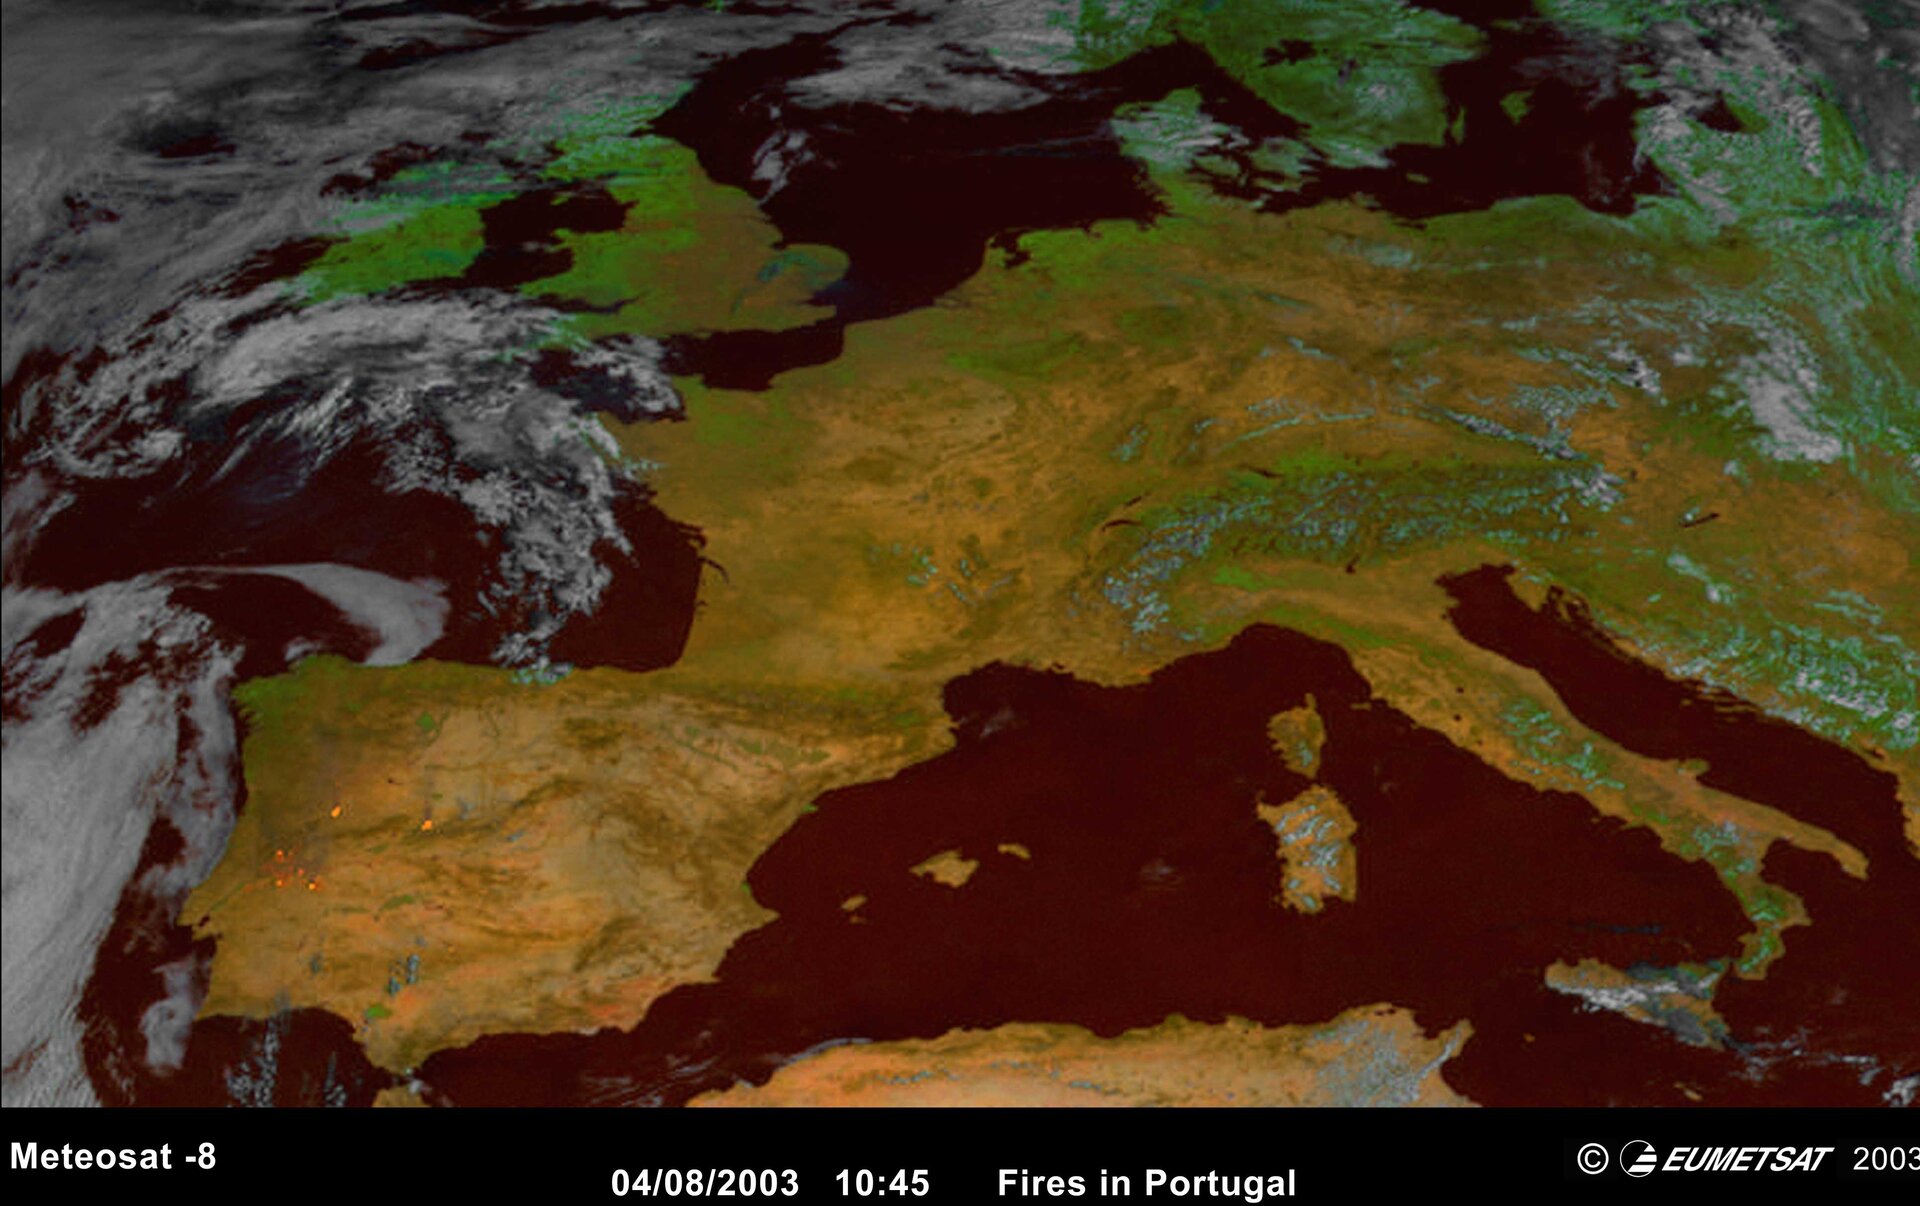 Portuguese forest fires as seen by Meteosat-8